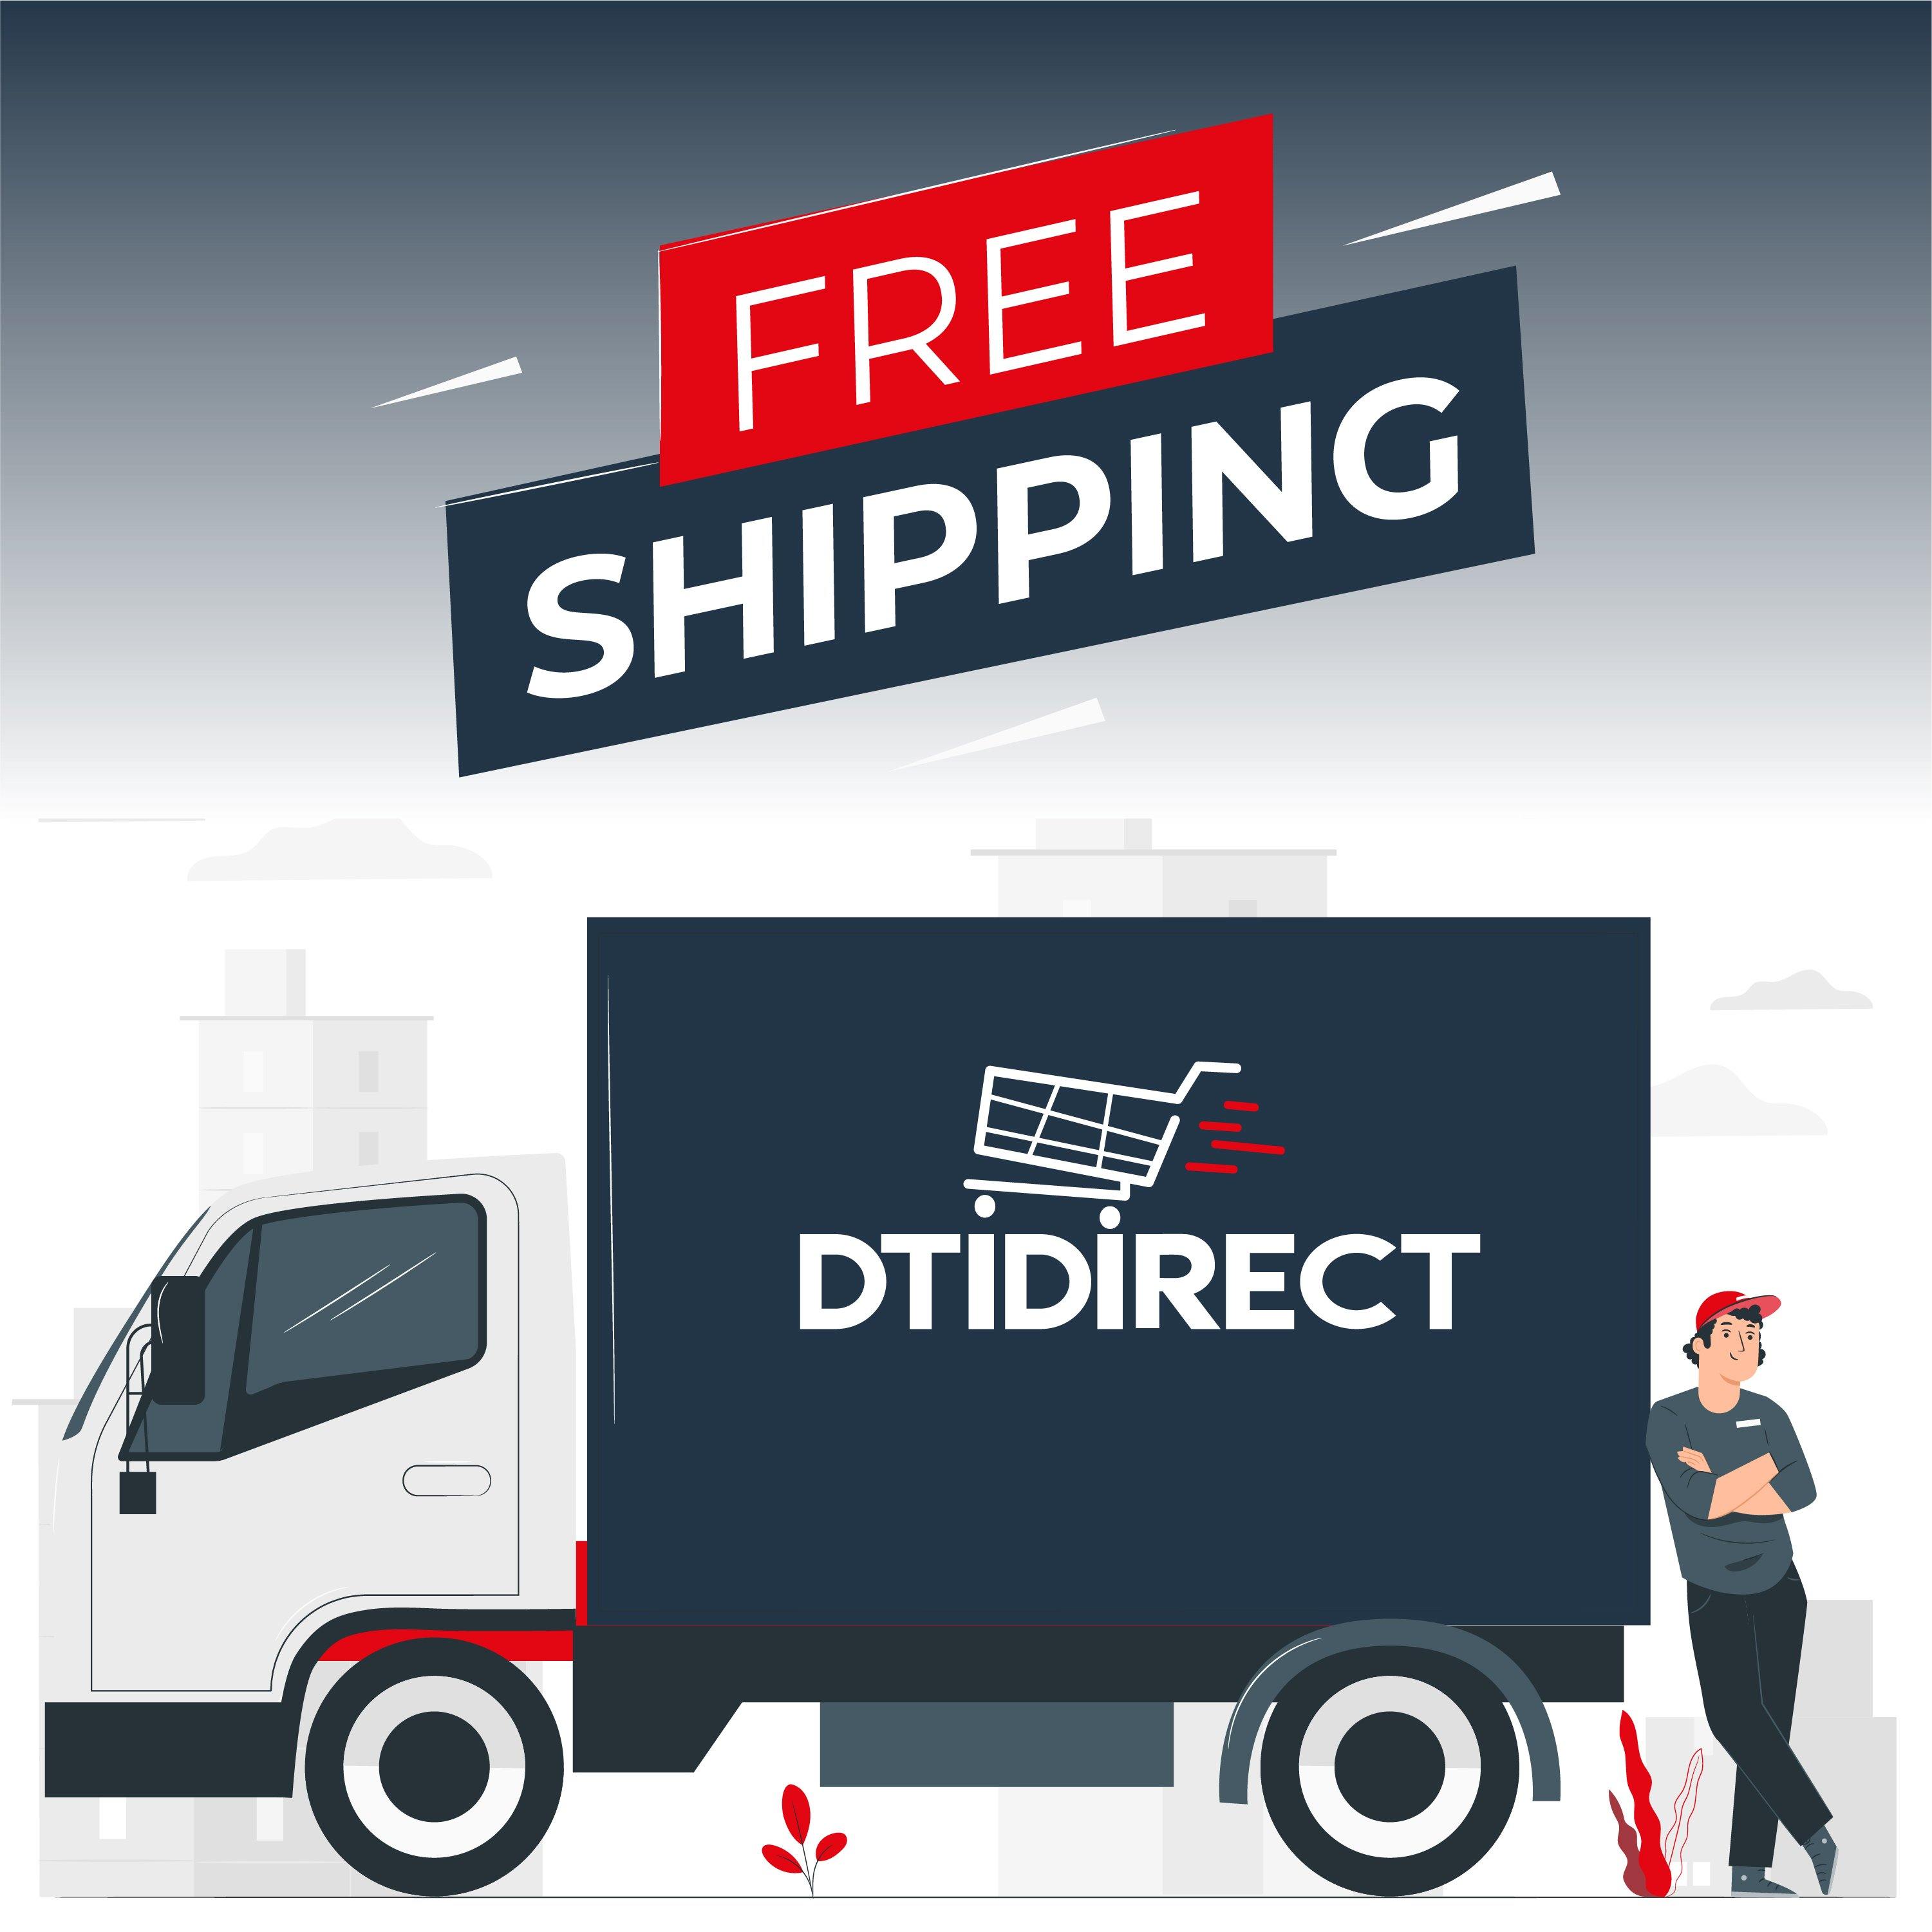 Why we have Free Shipping and Its benefits